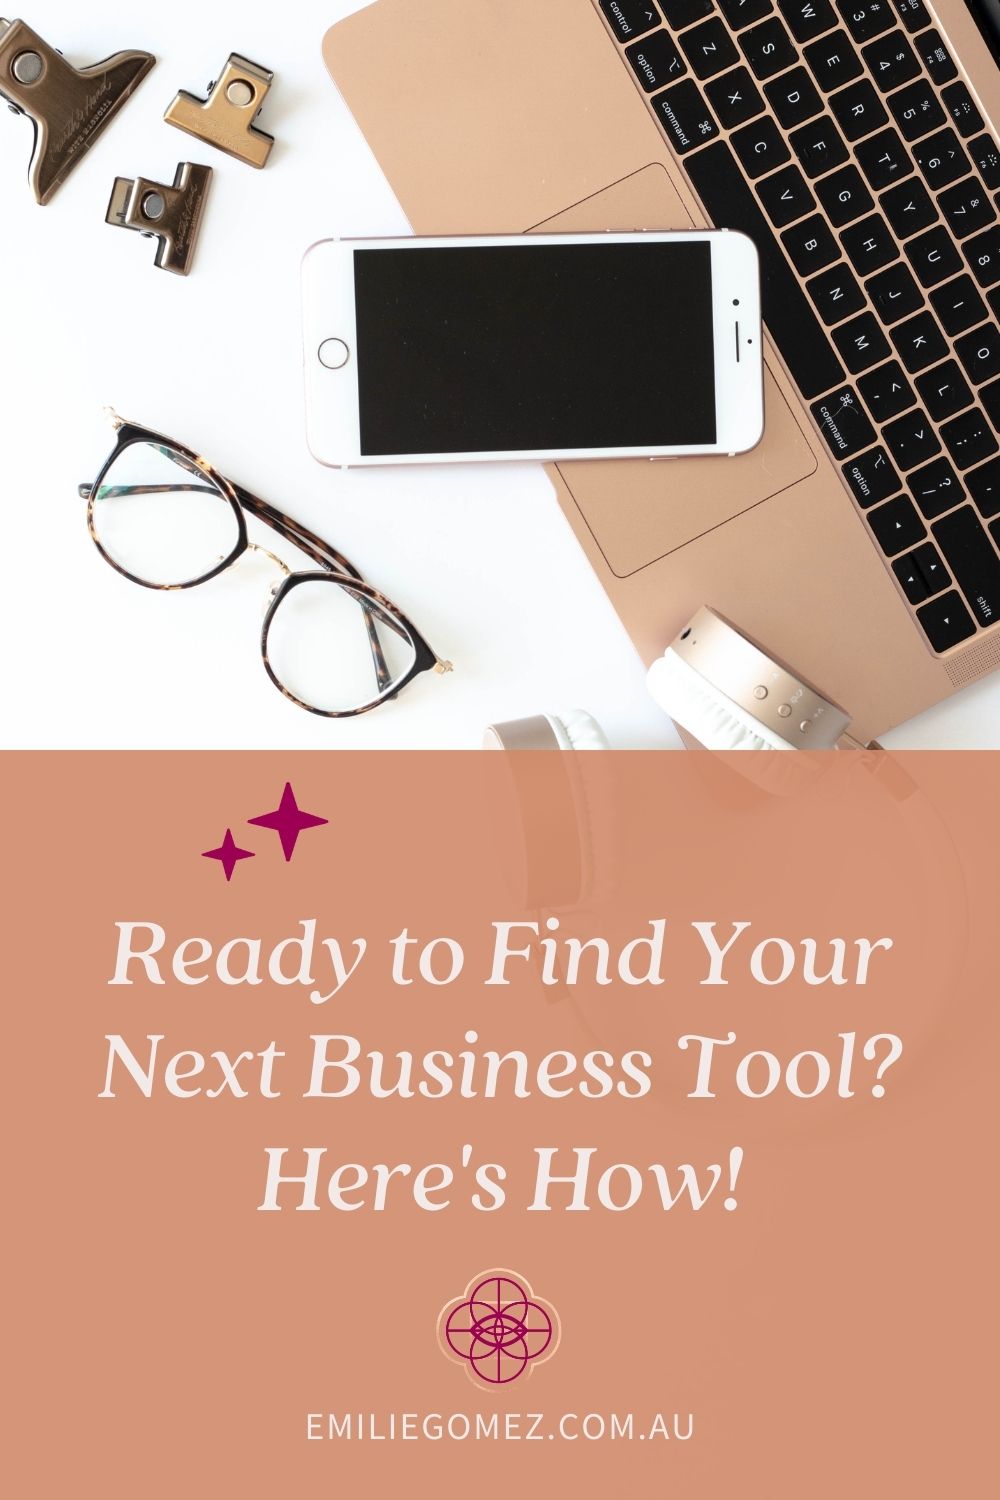 As a solopreneur, running an online business can be daunting without the right tools to help. Finding the right business tool that serves your needs and fits into your budget is important. We’ve got you covered - click through to learn how! If you're ready to find your next business tool to improve how you run your business and boost your productivity, then this post is for you!